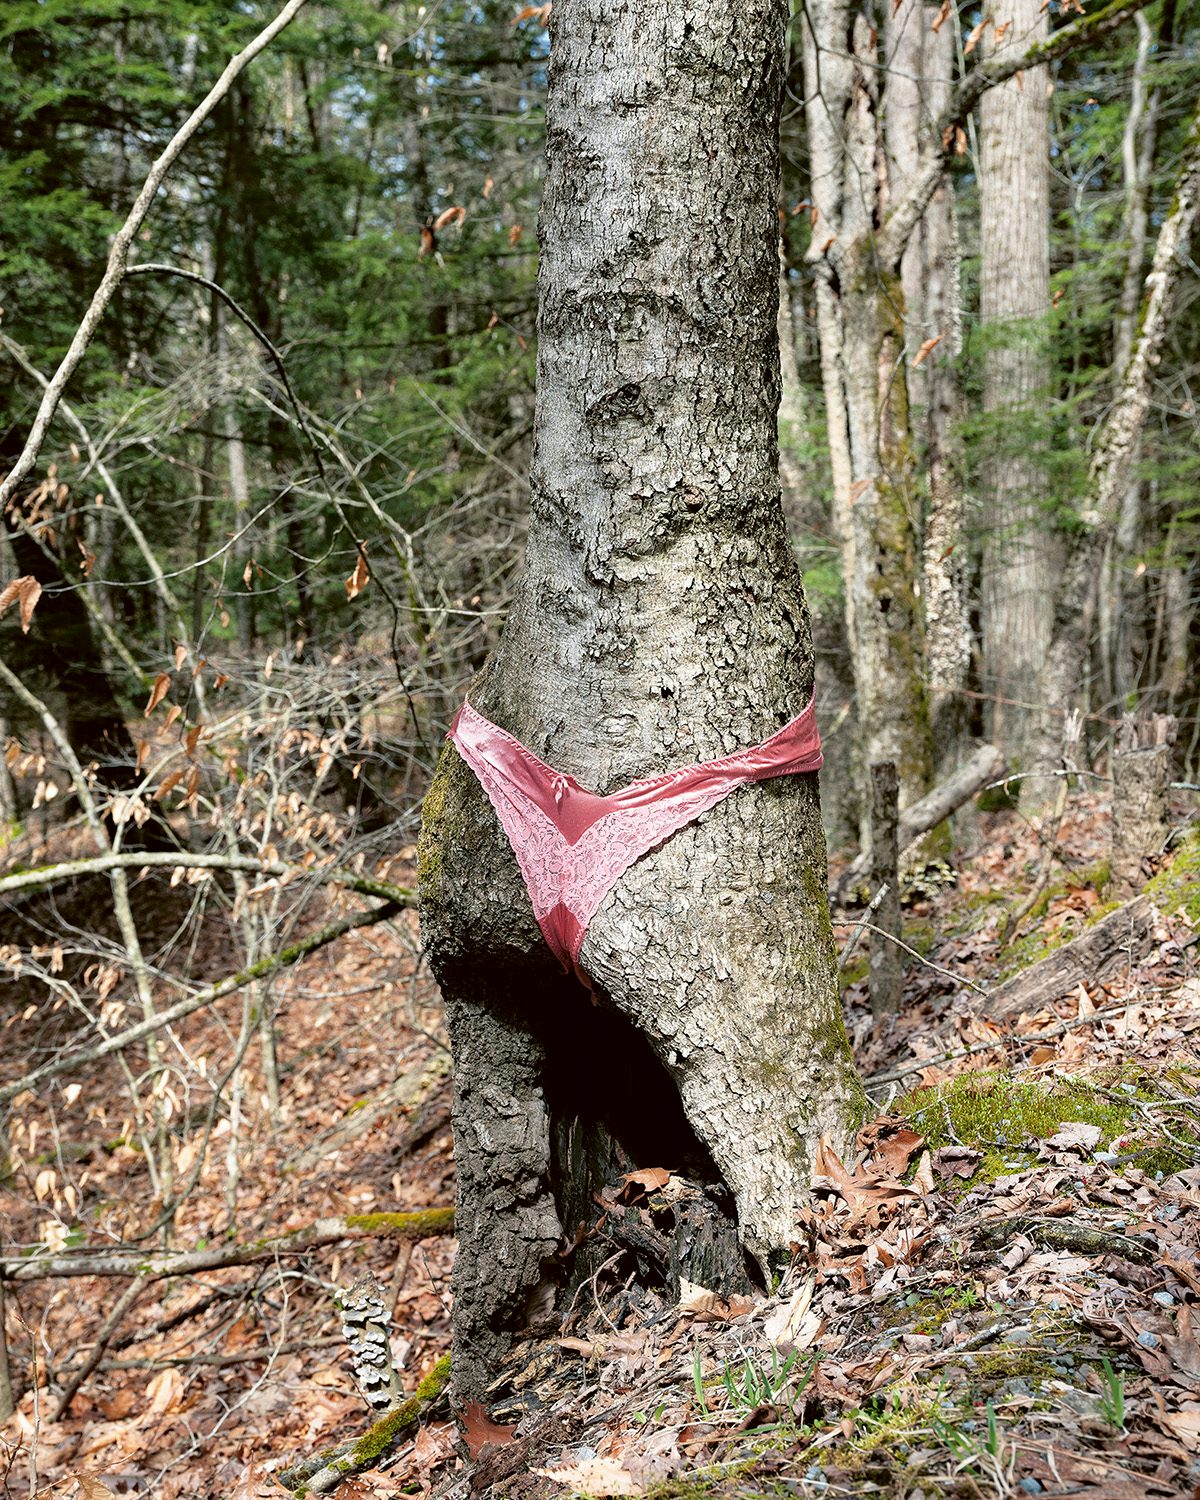 Image from Another Online Pervert by Brea Souders showing pink underwear attached to a tree as though wearing it